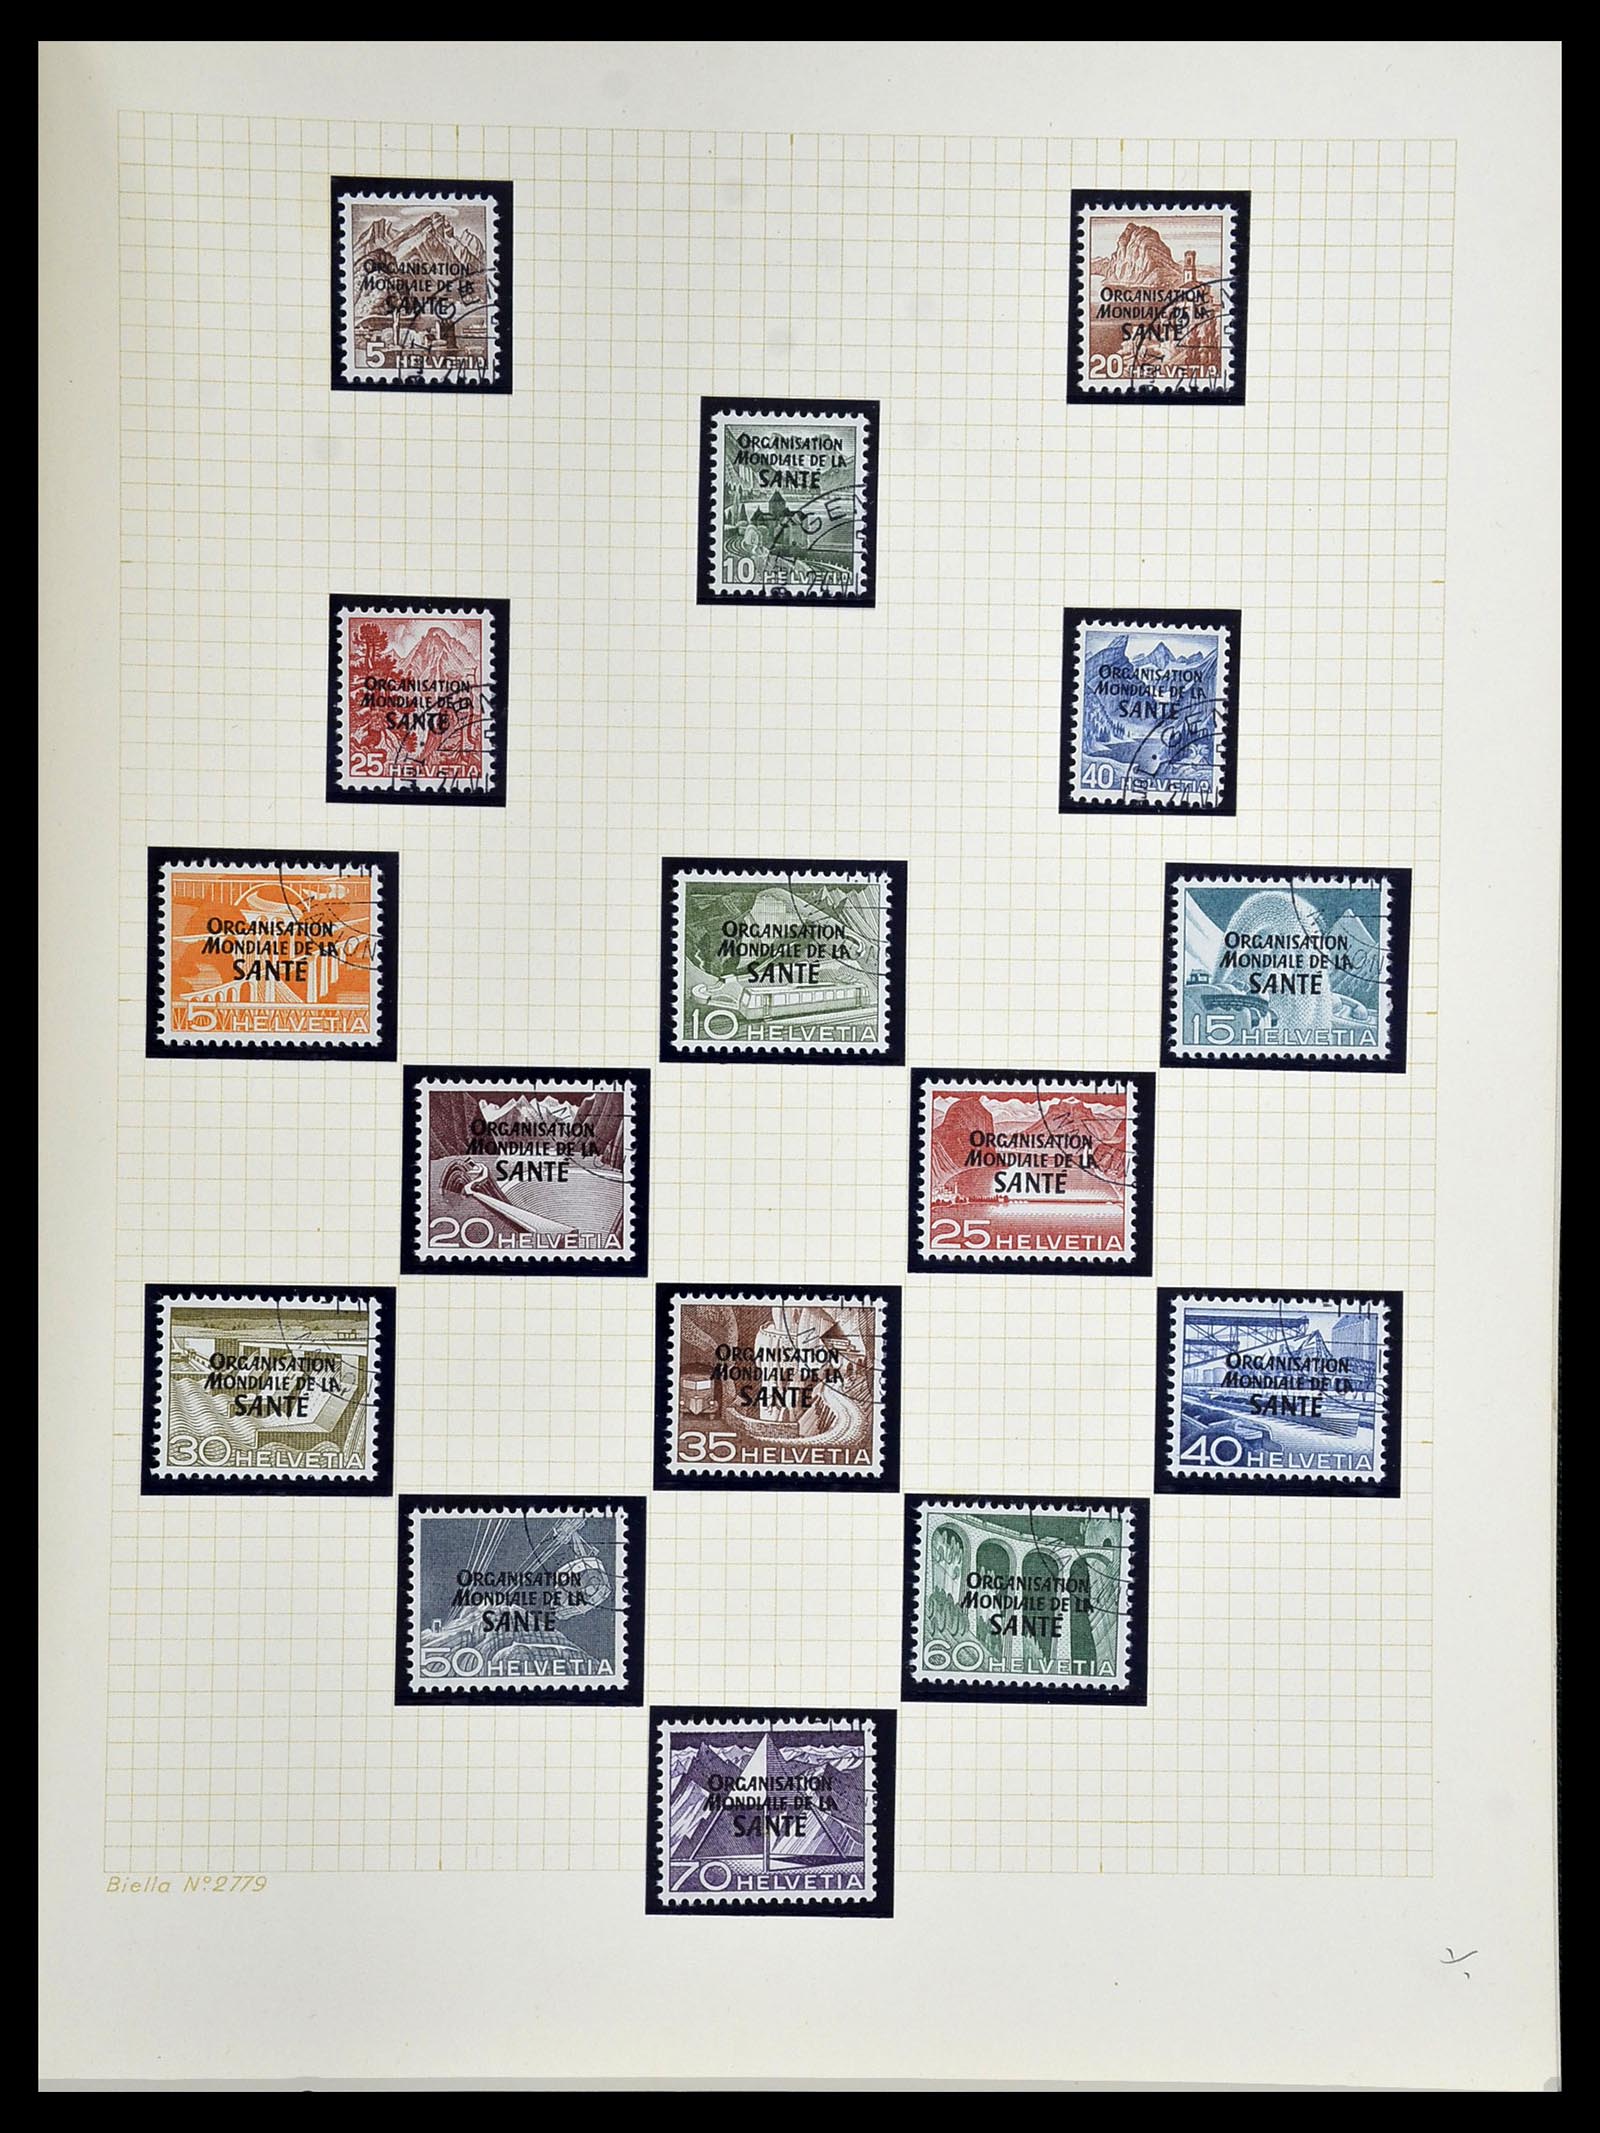 34135 035 - Stamp collection 34135 Switzerland back of the book 1910-1950.